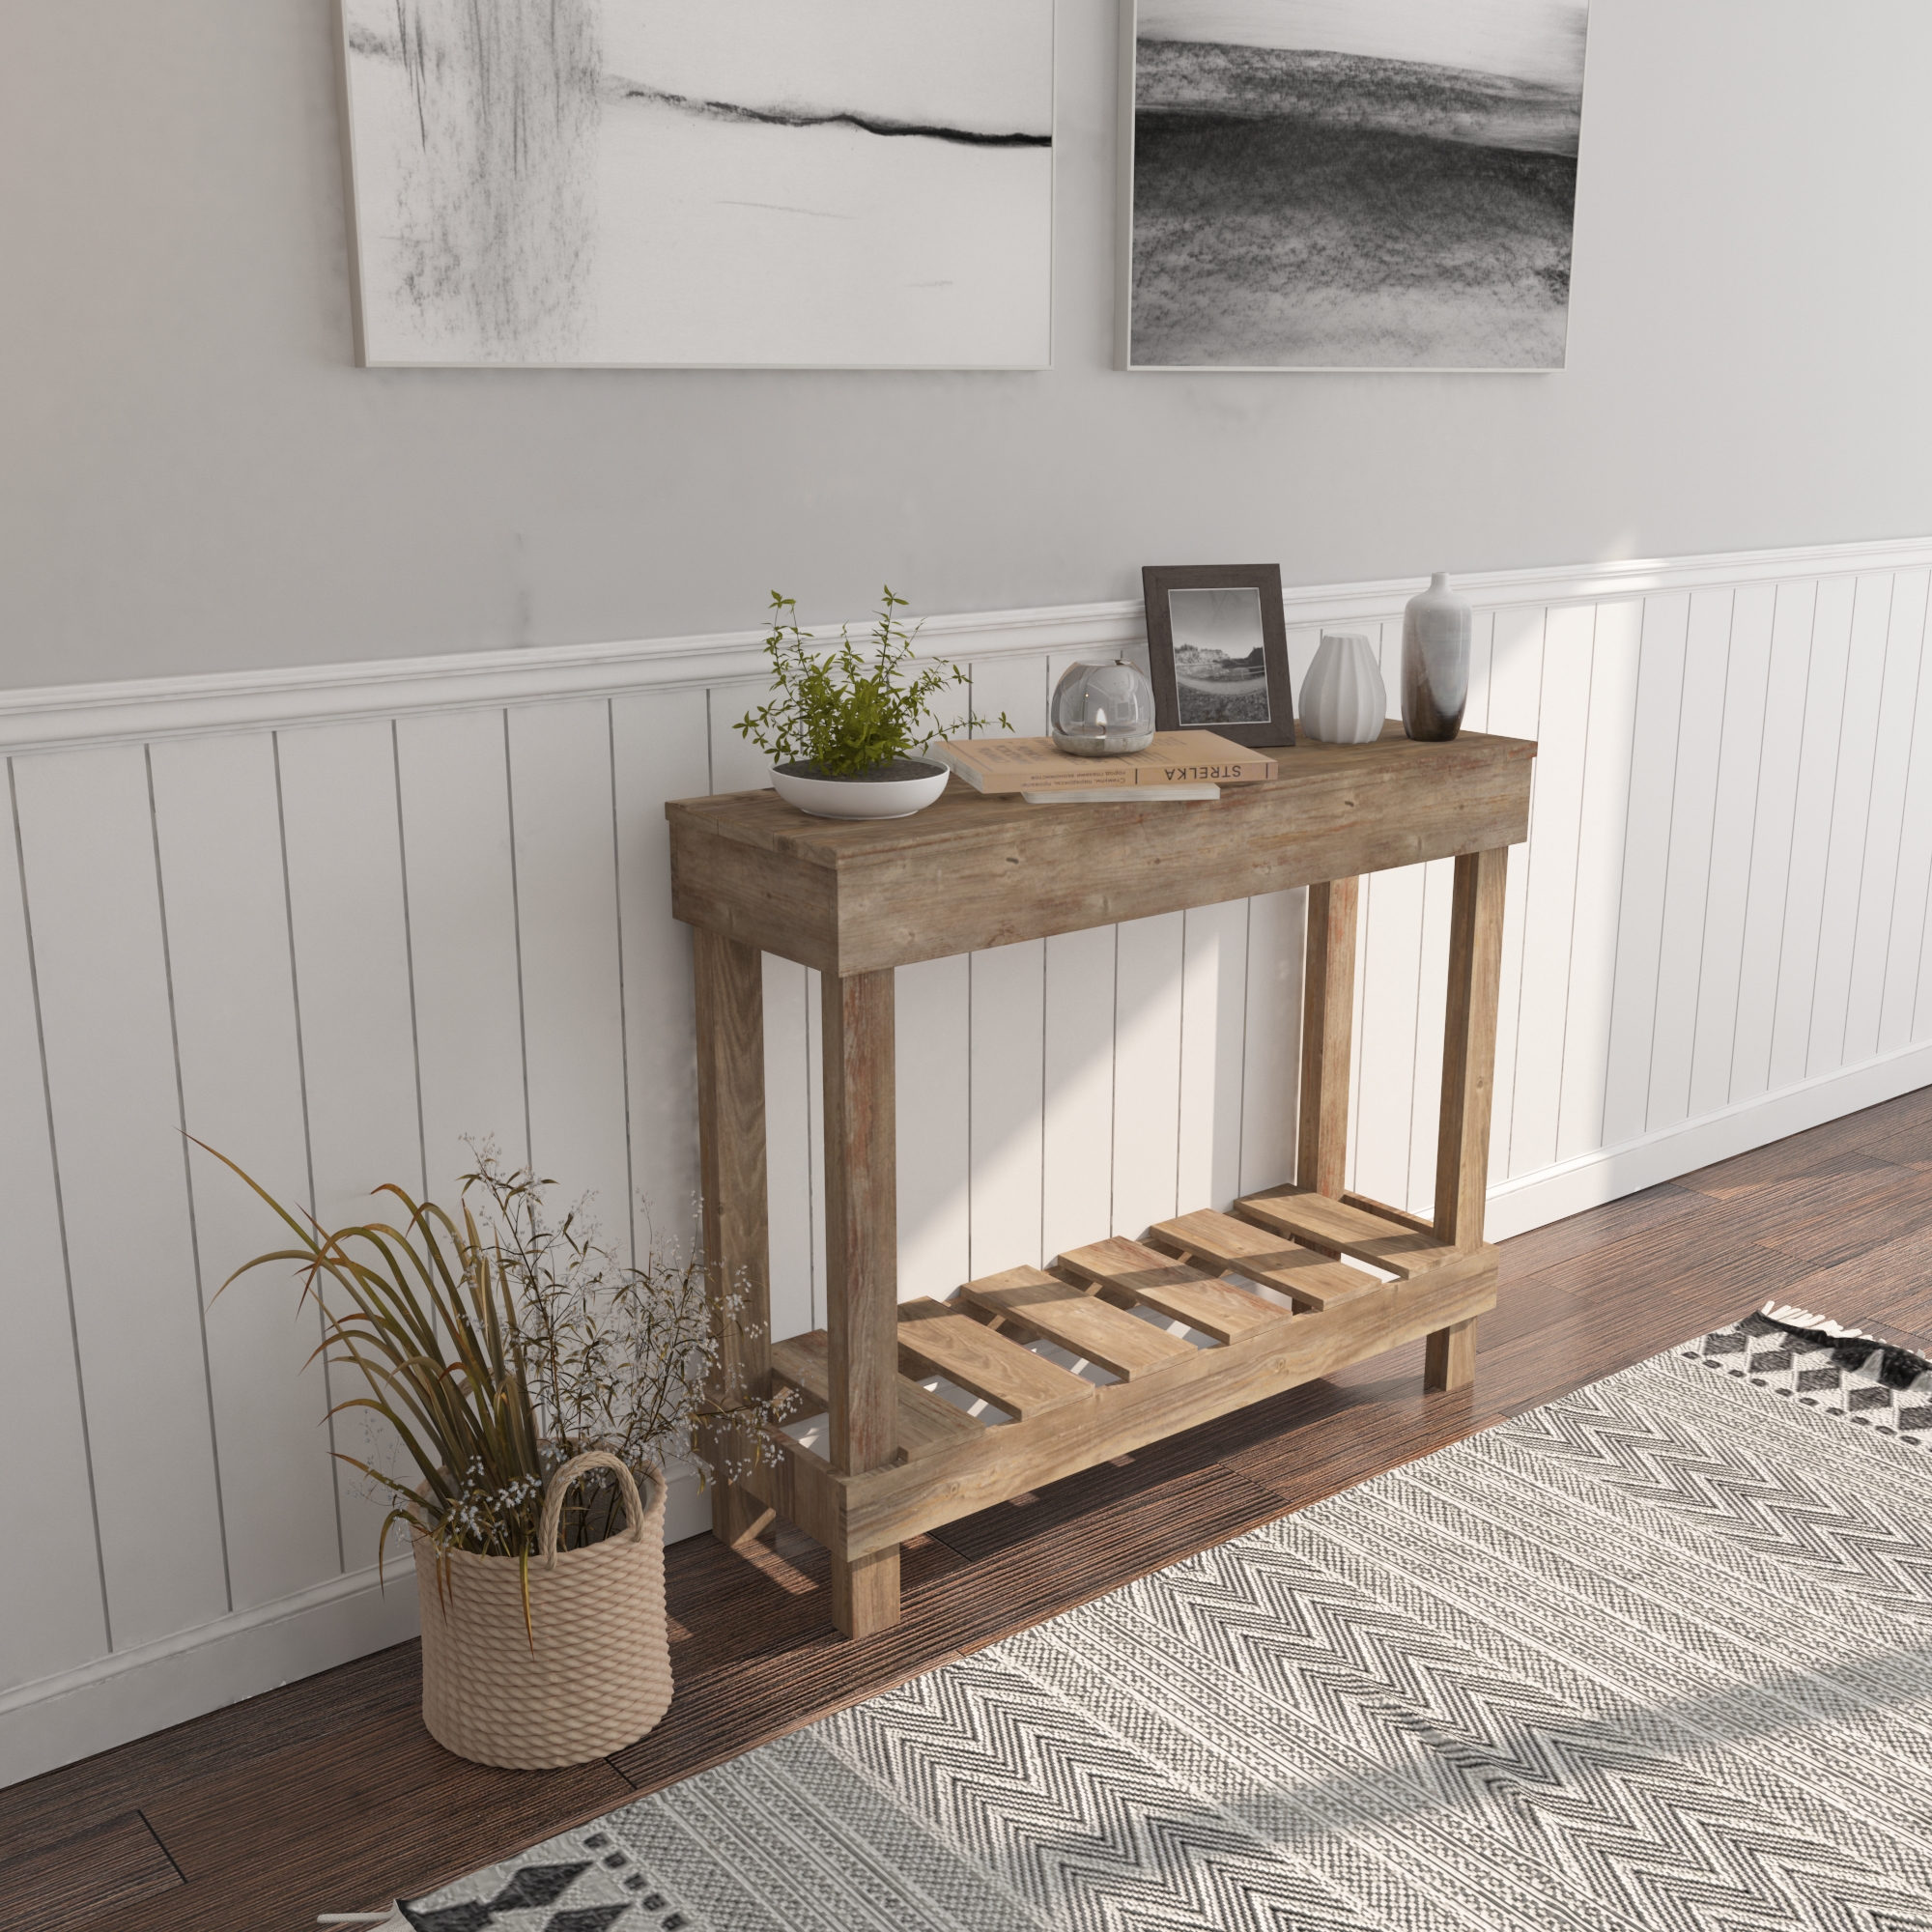 Woven Paths Farmhouse Rustic Wood Small Entryway or Living Room Sofa Table, Brown - image 3 of 4